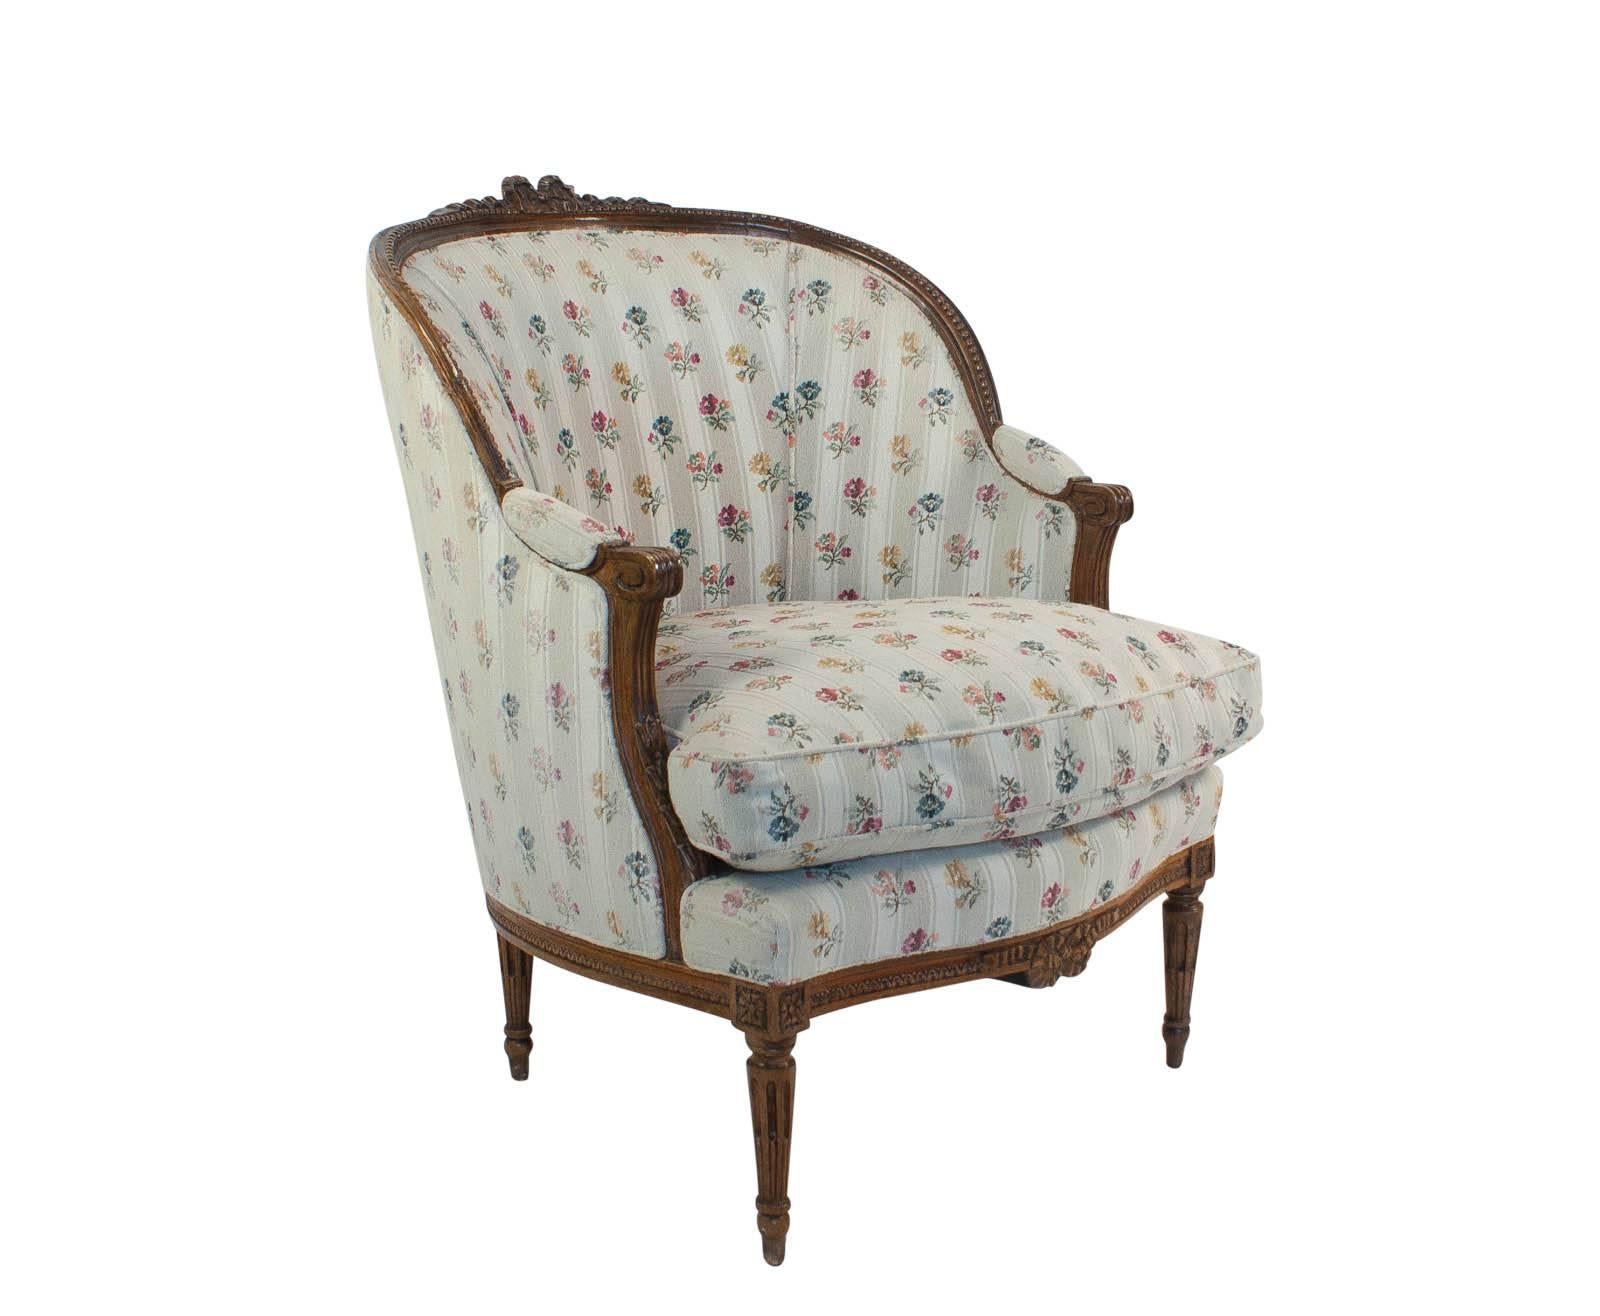 A large Louis XVI style fruitwood Bergere made in France, circa 1880. A Classic chair designed for comfort. Upholstery is older. Perfect for sitting by the fire and reading a book.